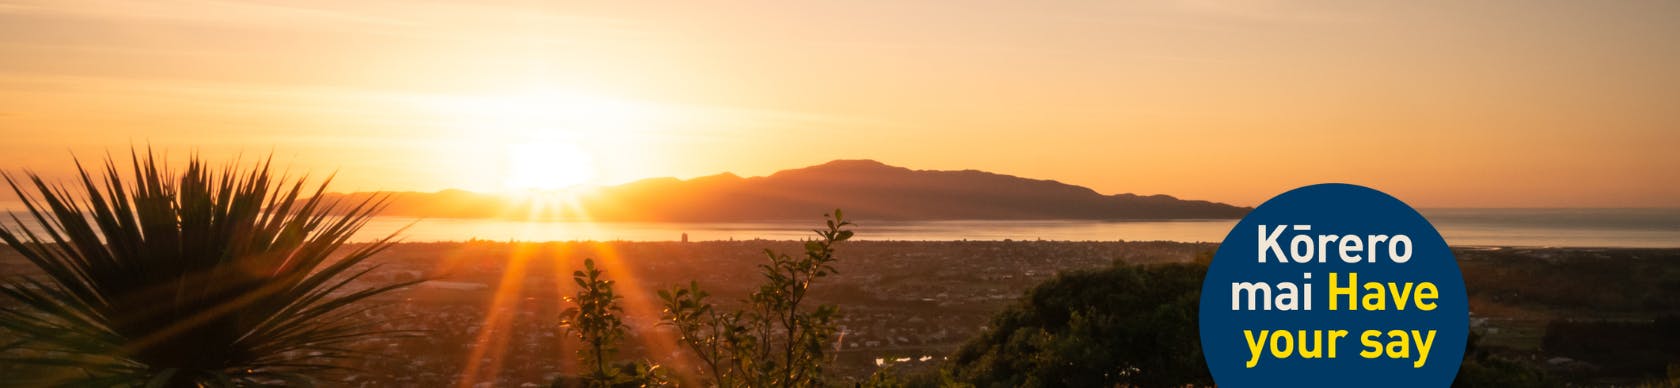 Sunset over Kāpiti Island, with a cabbage tree in the foreground and "Kōrero mai, have your say" in a blue bubble. 